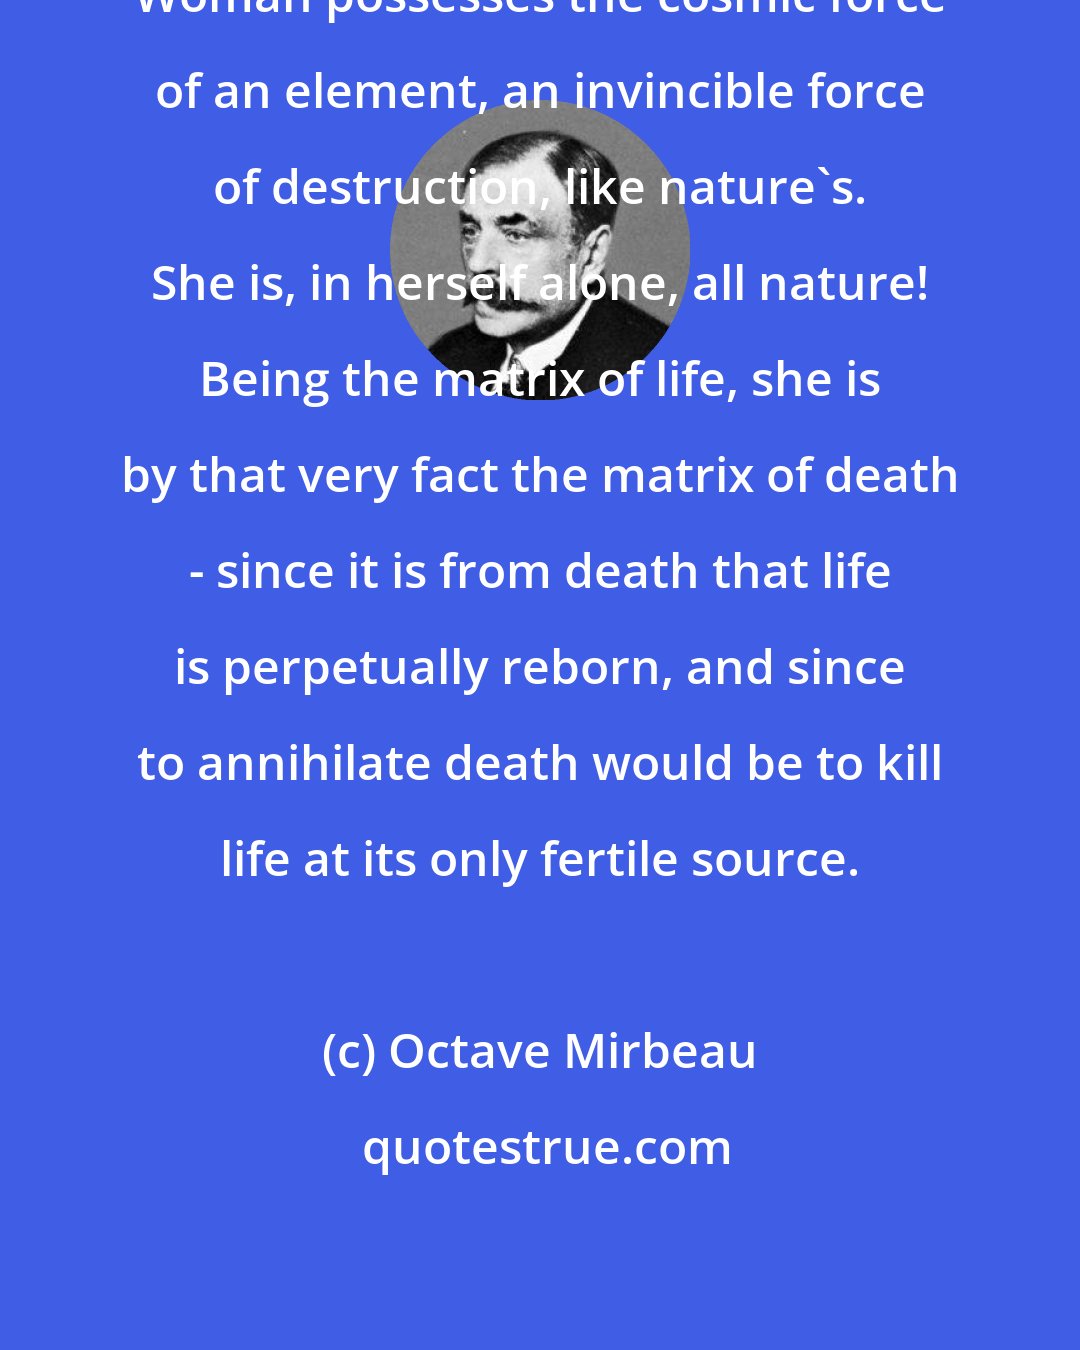 Octave Mirbeau: Woman possesses the cosmic force of an element, an invincible force of destruction, like nature's. She is, in herself alone, all nature! Being the matrix of life, she is by that very fact the matrix of death - since it is from death that life is perpetually reborn, and since to annihilate death would be to kill life at its only fertile source.